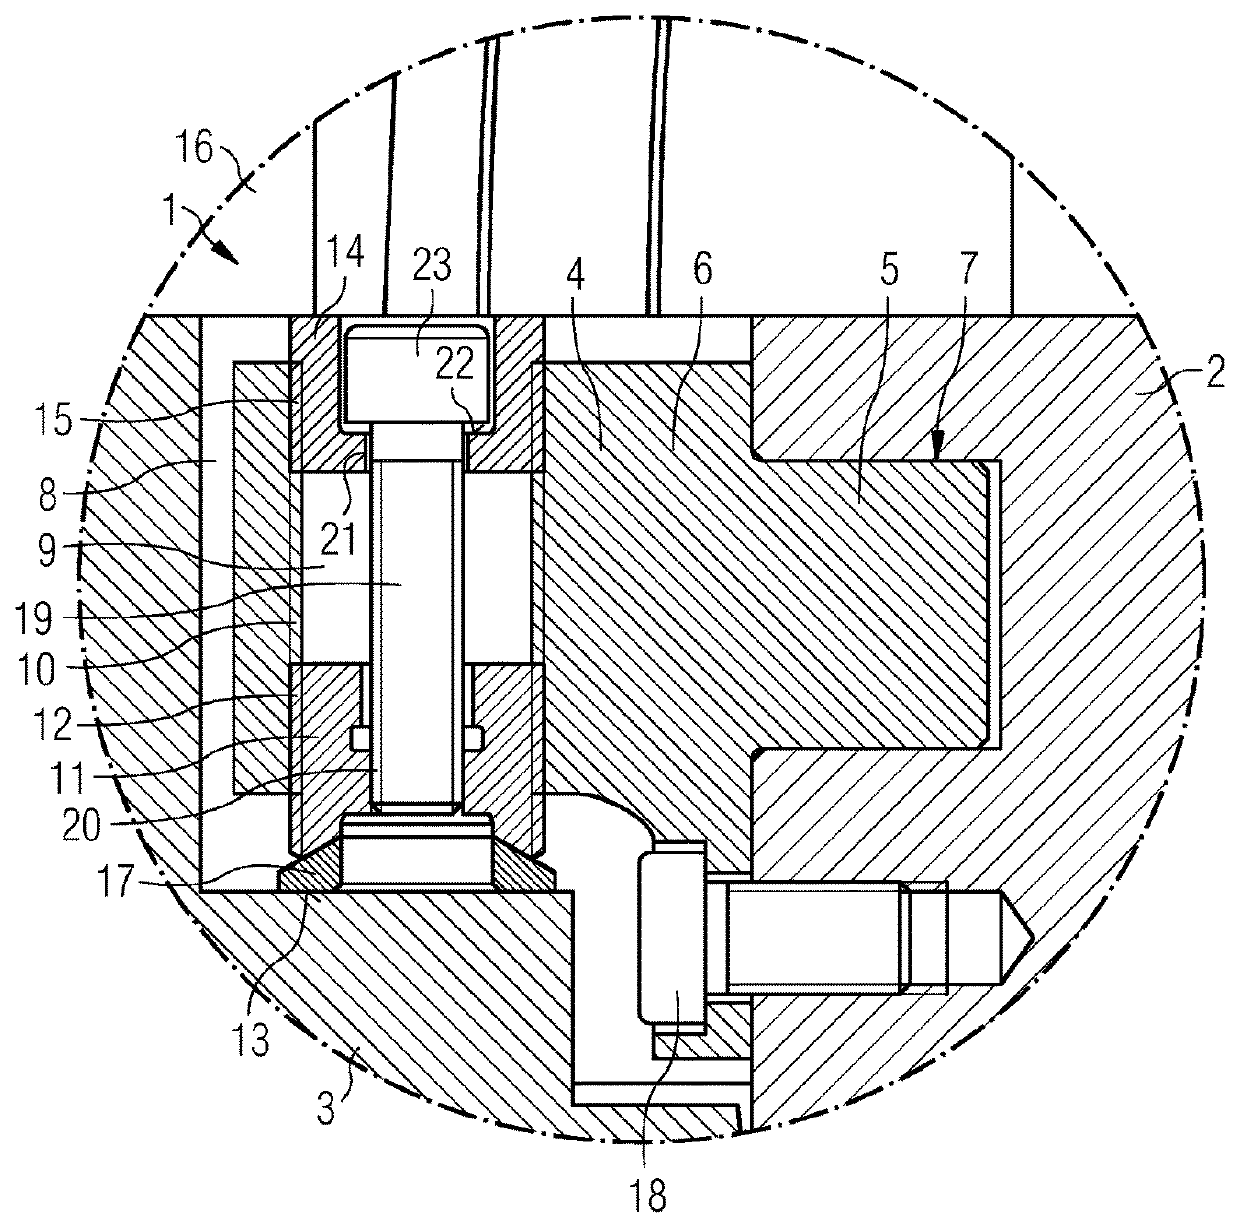 Apparatus for orienting a guide vane support relative to a turbine casing